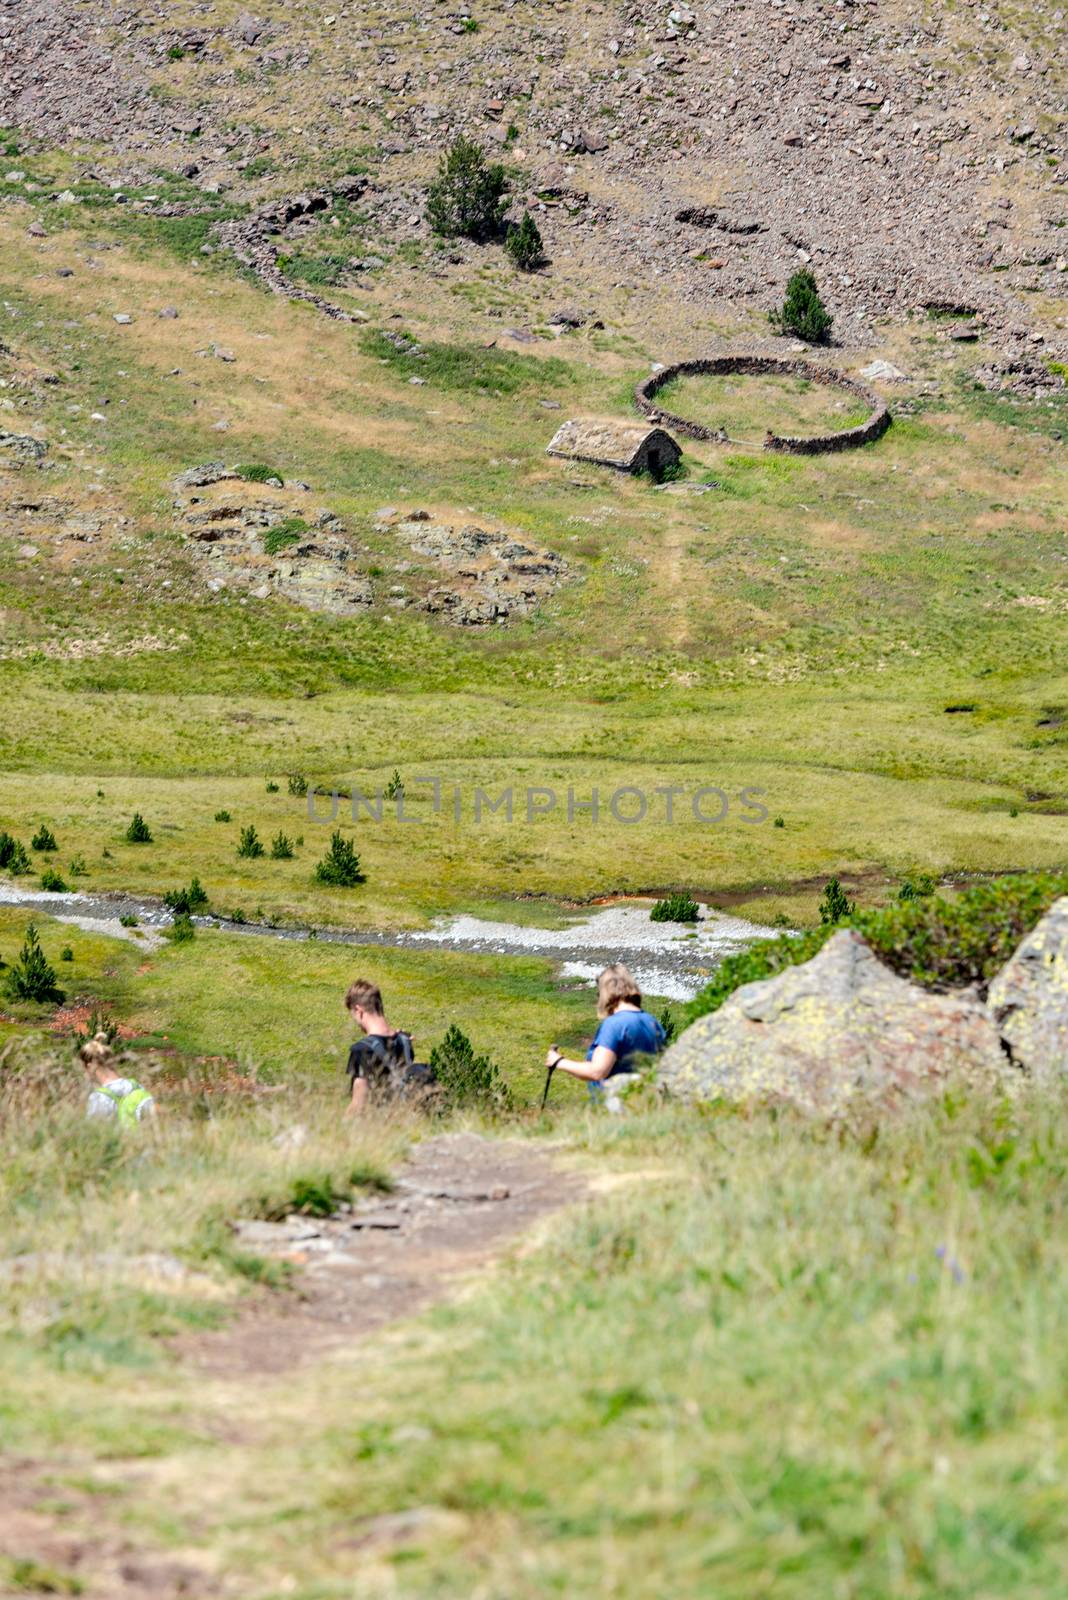 Coma Pedrosa, Andorra : 02 August 2020 : Group of Tourist in Coma Pedrosa refuge at 2266 meters of altitude in Andorra Pyrenees in summer 2020.